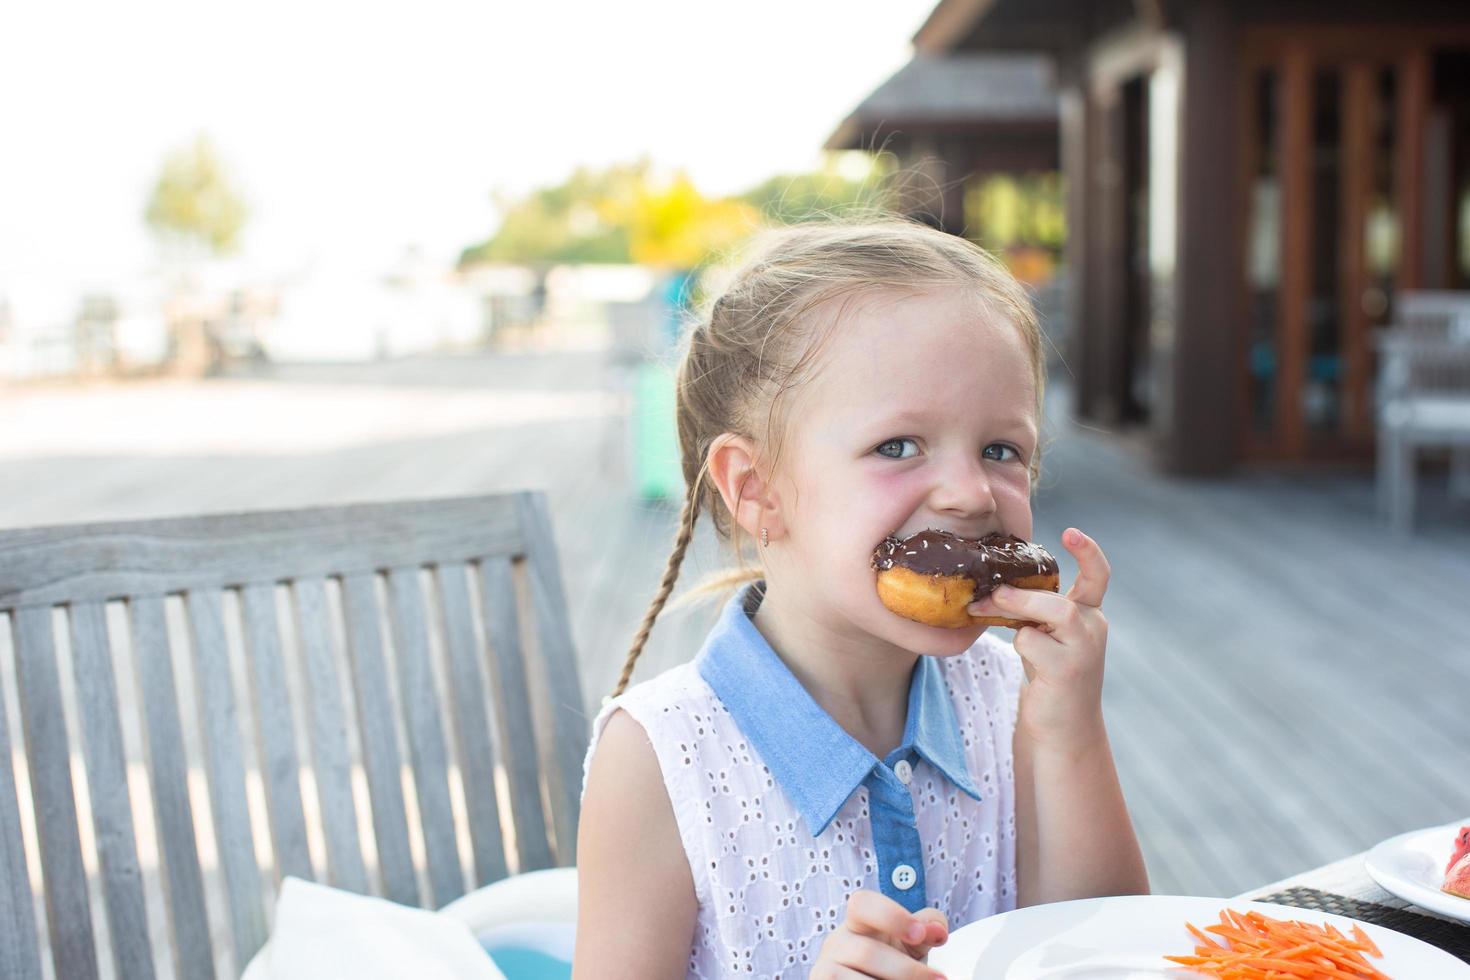 Girl eating a donut photo